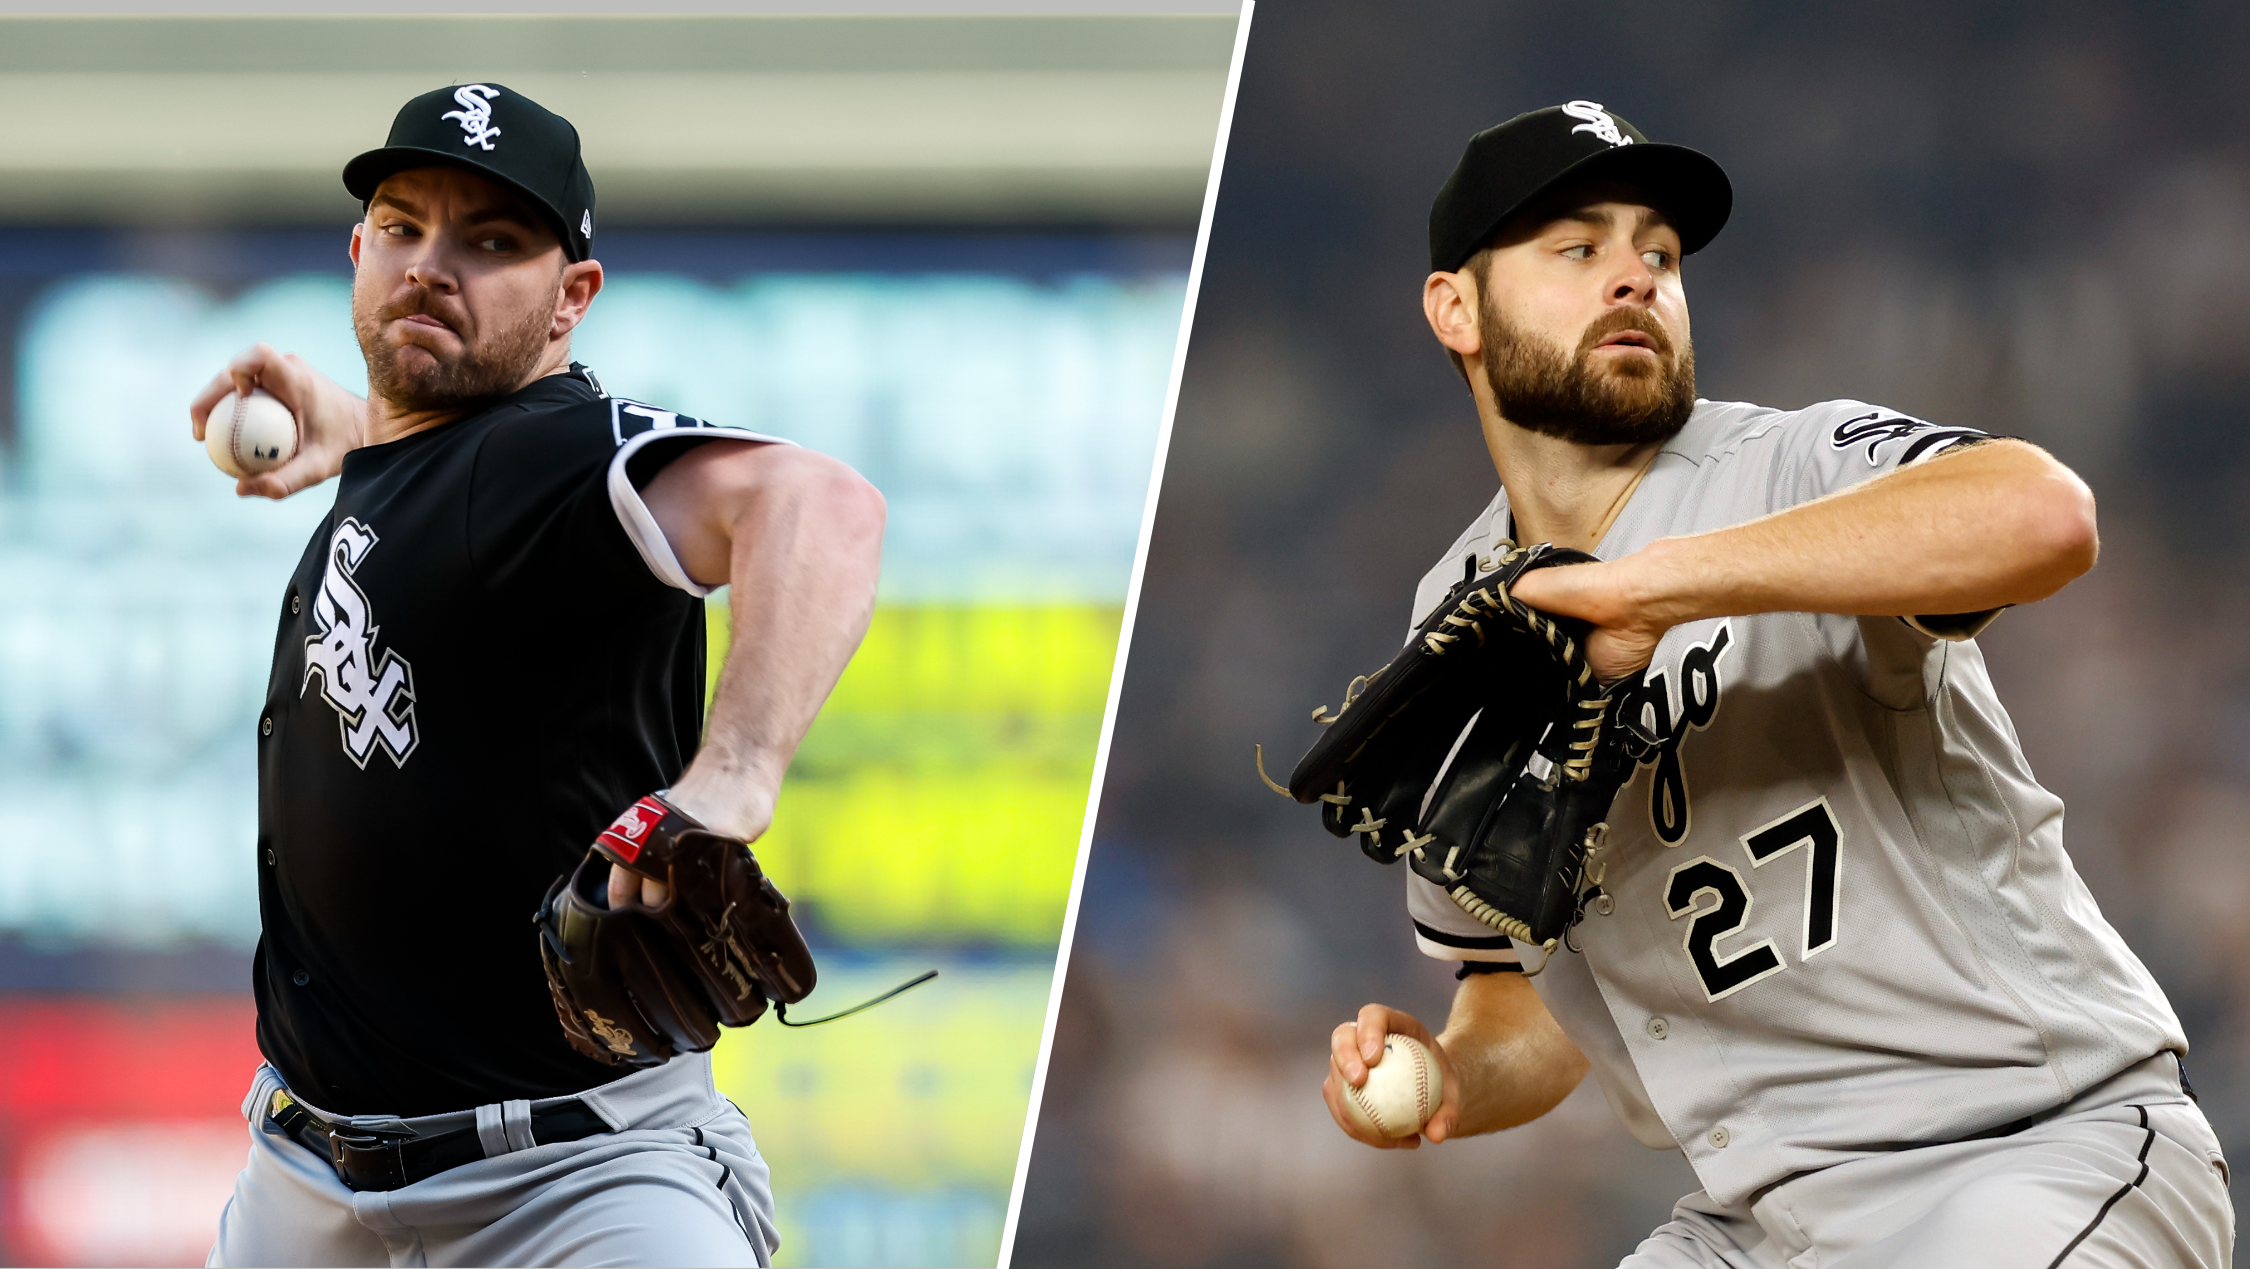 White Sox to honor Lucas Giolito, Liam Hendriks with video tribute Thursday